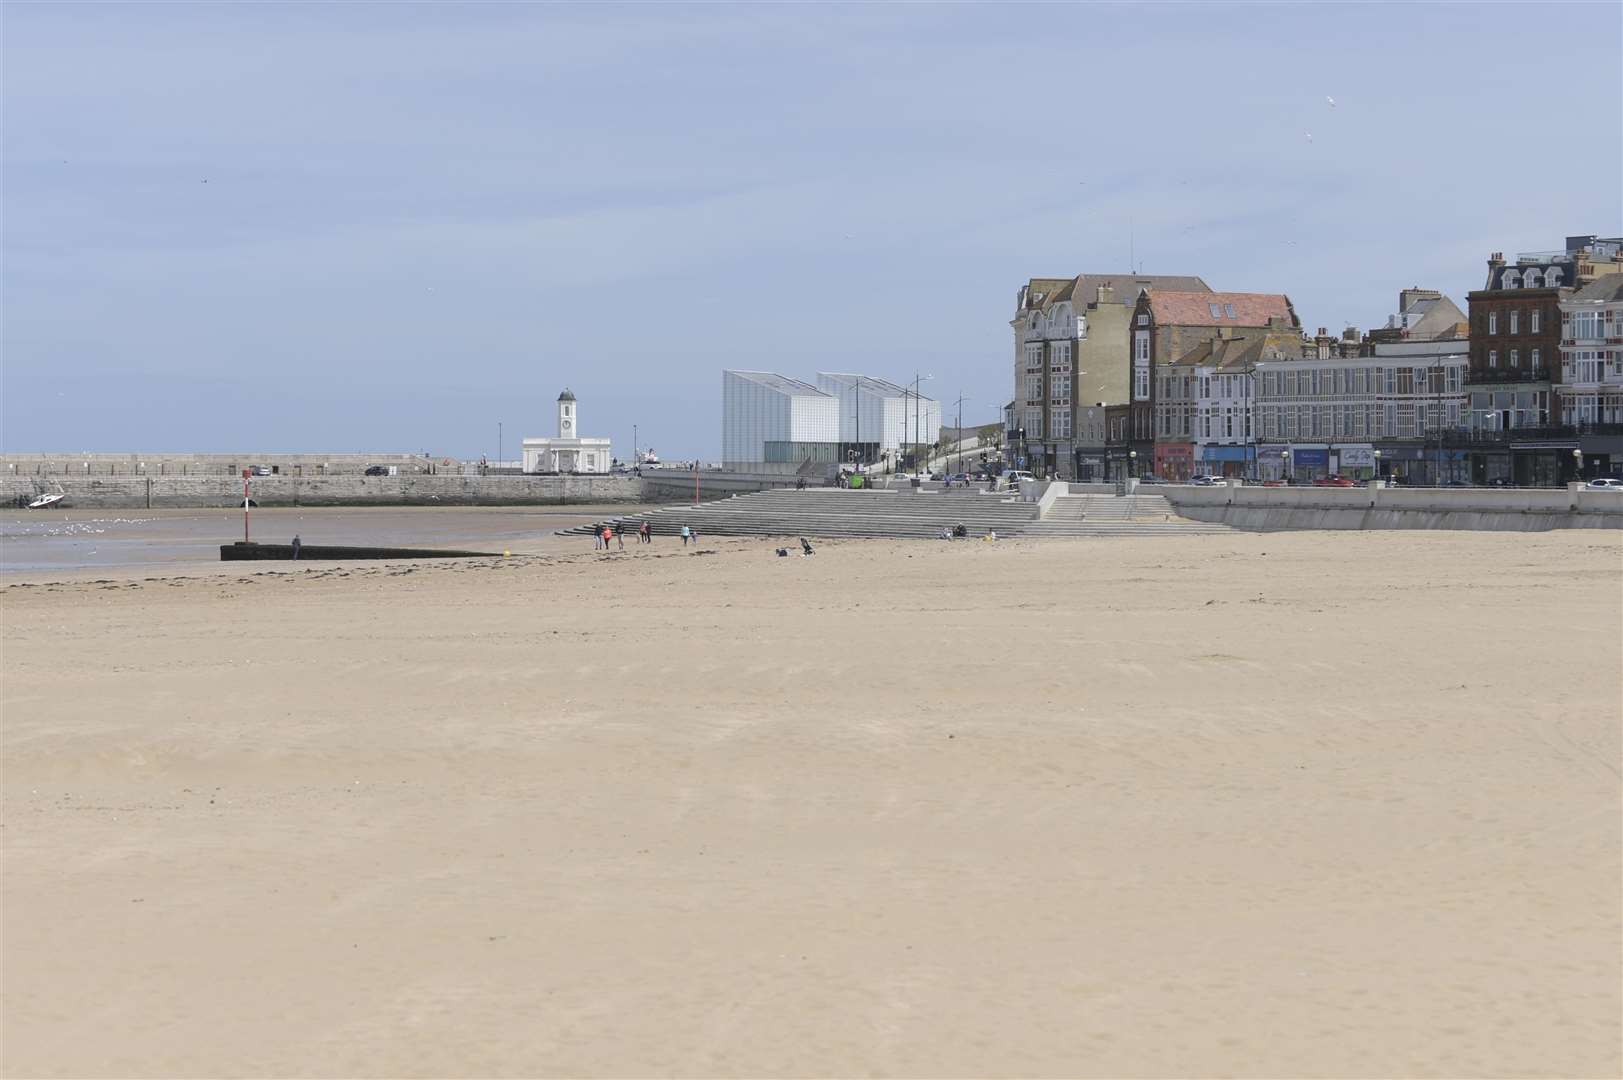 Margate Main Sands. Picture: Barry Goodwin